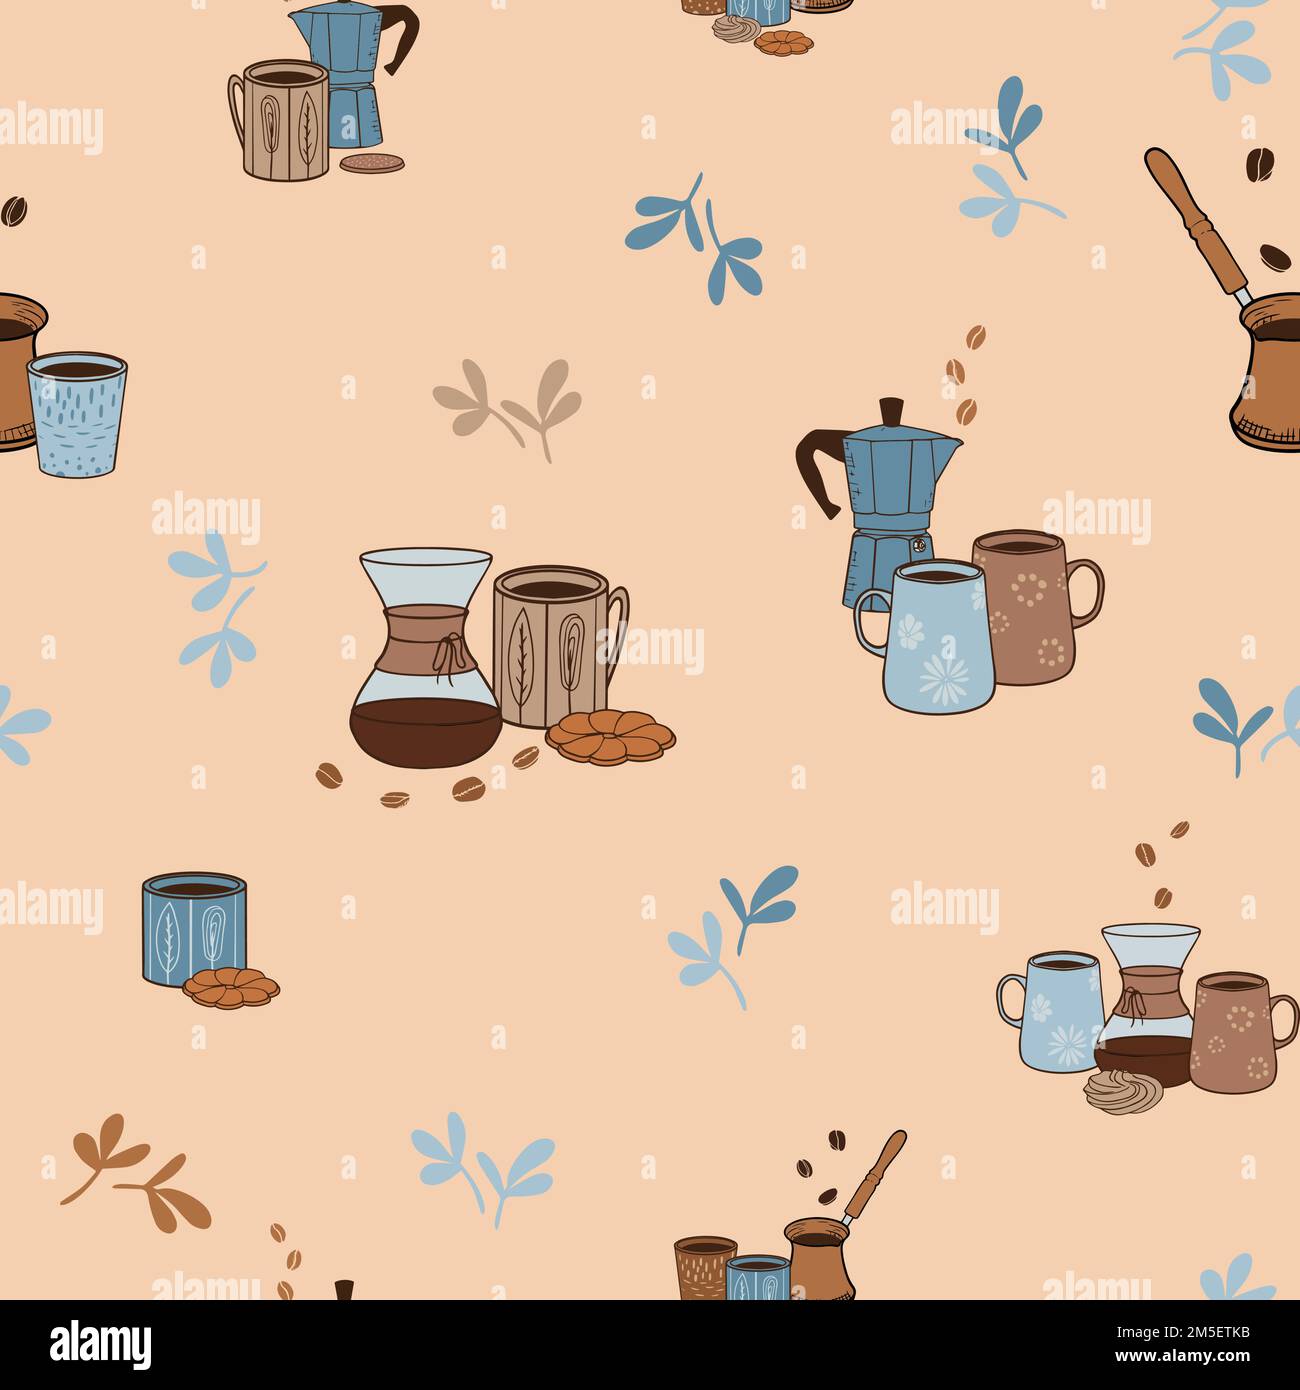 Coffee themed seamless vector pattern. Cups, cookies, coffee beans, manual coffee brewers. Vector illustration. Great for coffee shop, cafe, fika accessories Stock Vector